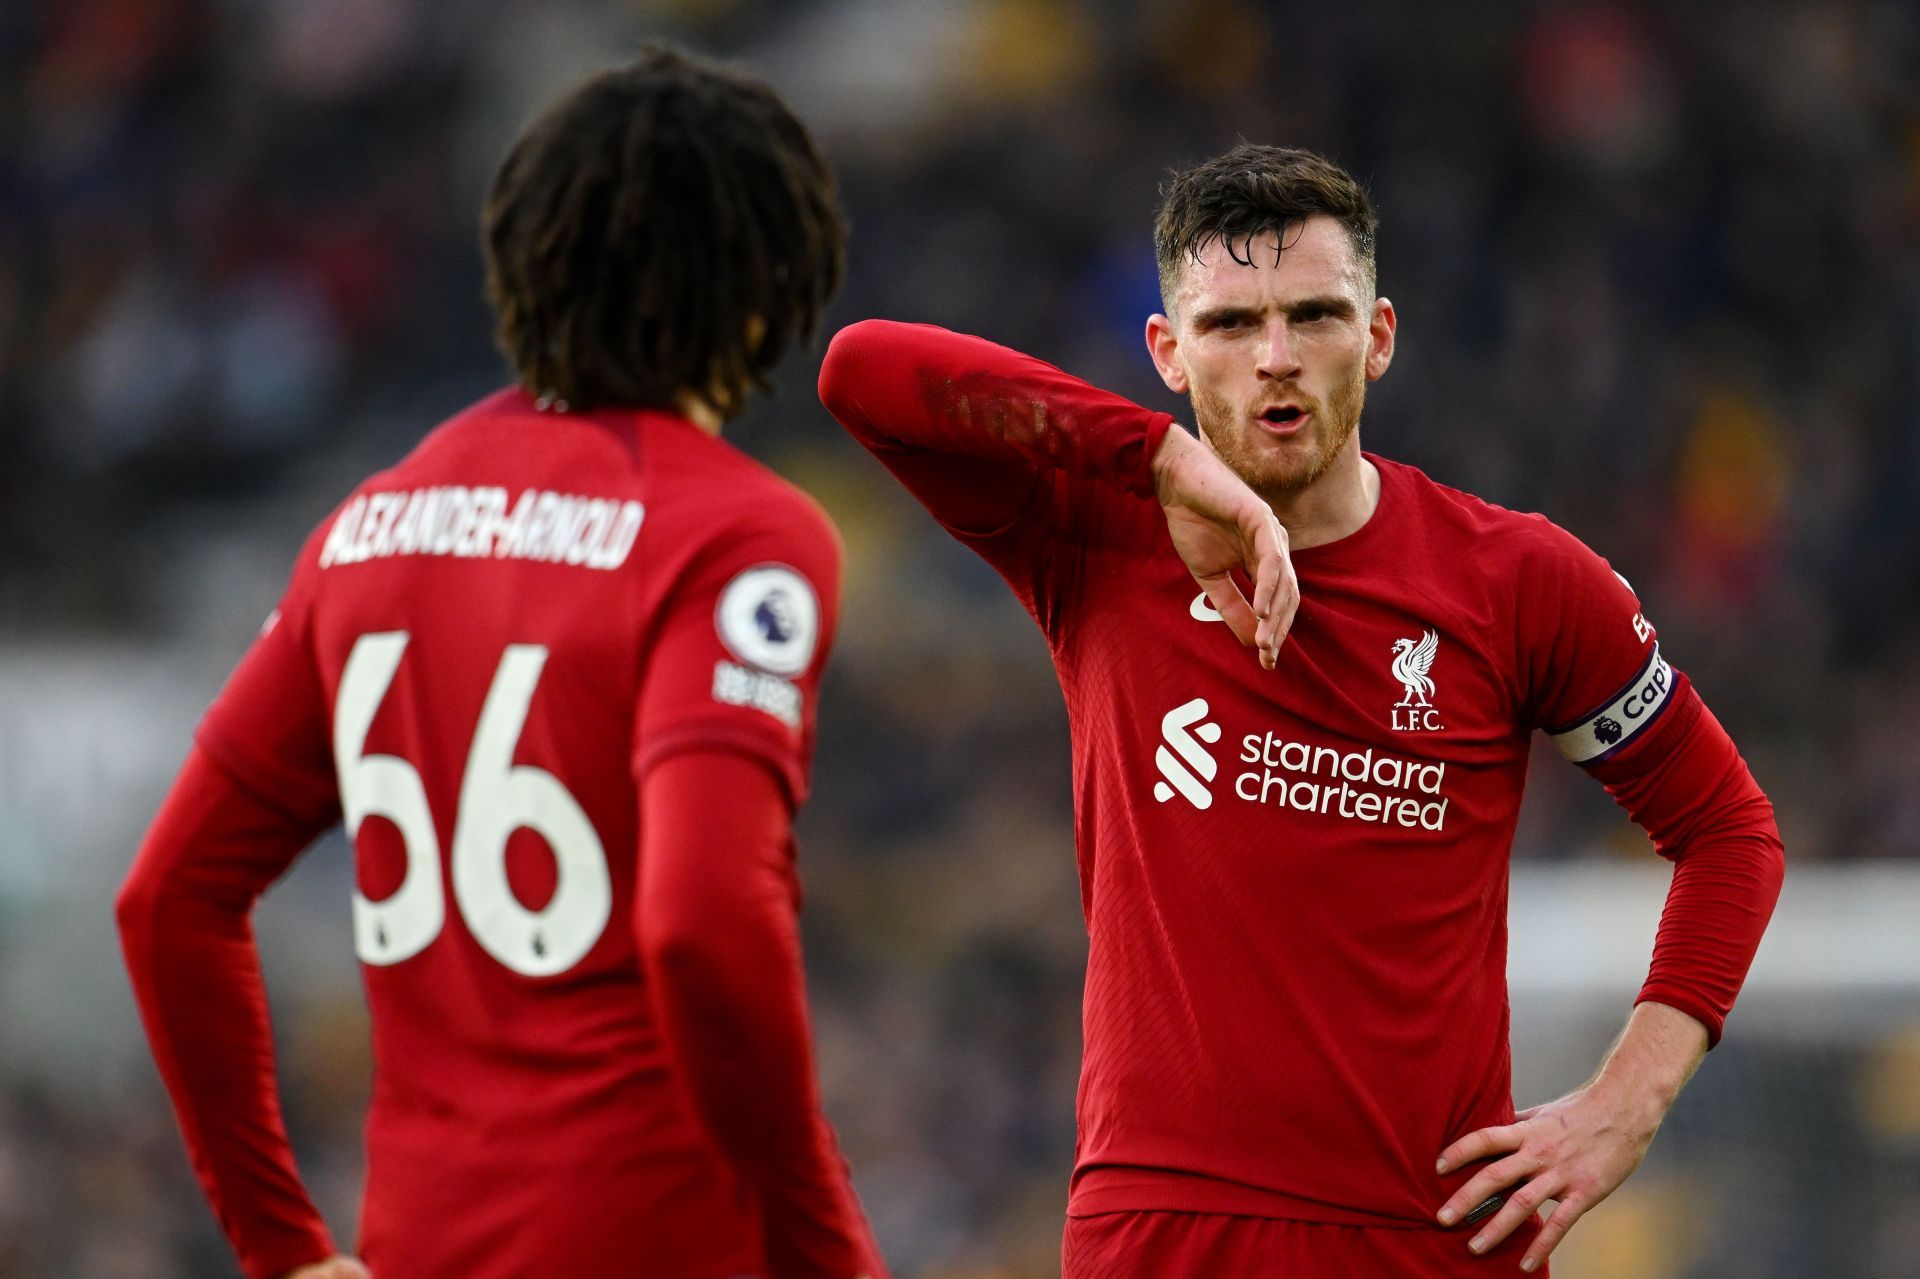 Liverpool duo Trent Alexander-Arnold and Andy Robertson both featured against Arsenal